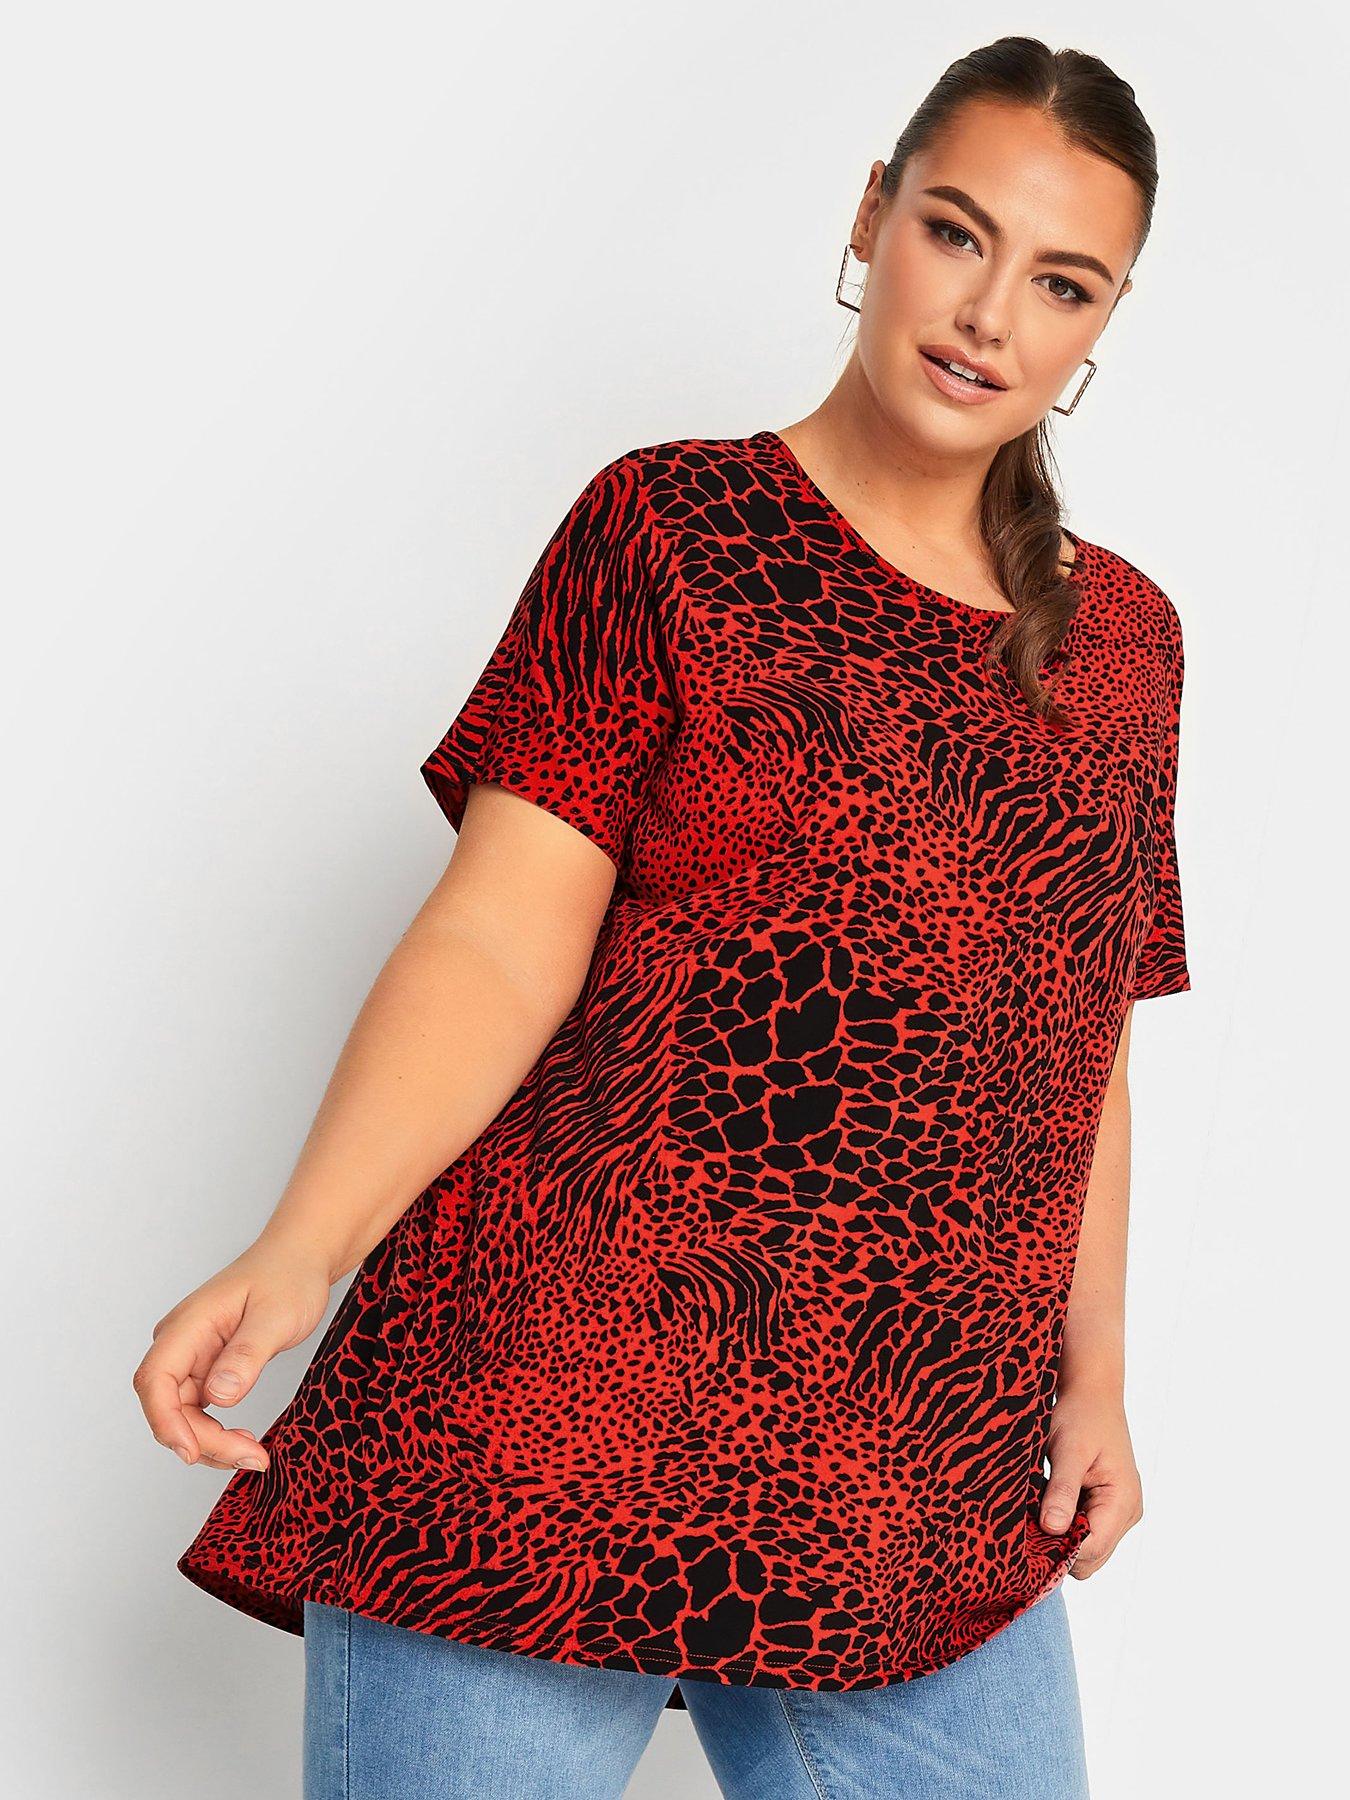 Yours Yours Round Neck Jersey Top Red Print | Very Ireland